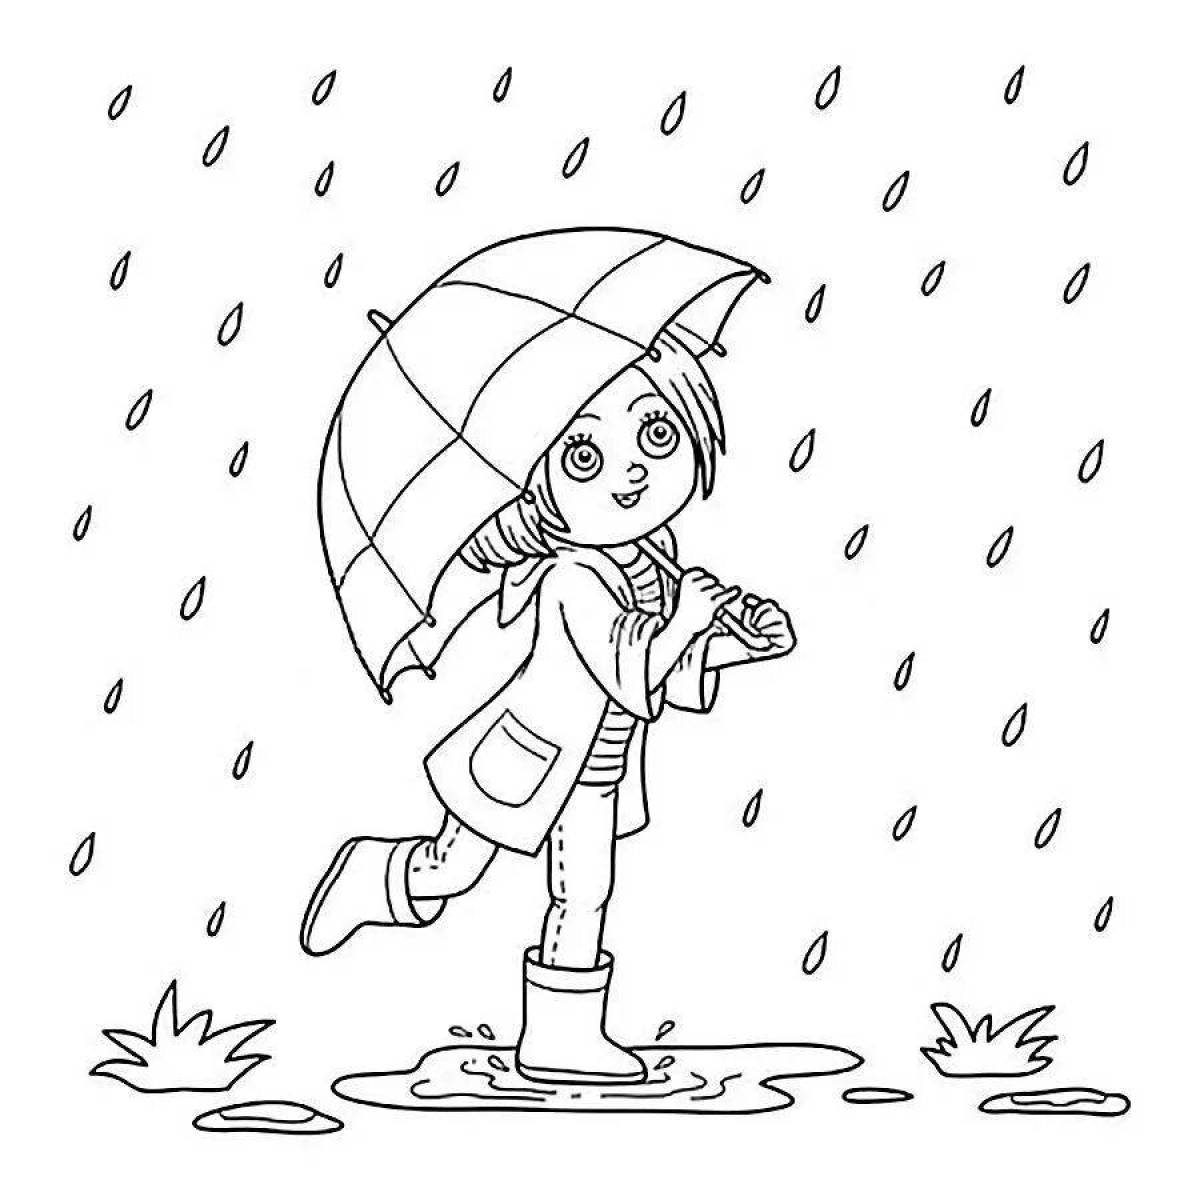 Coloring girl with umbrella